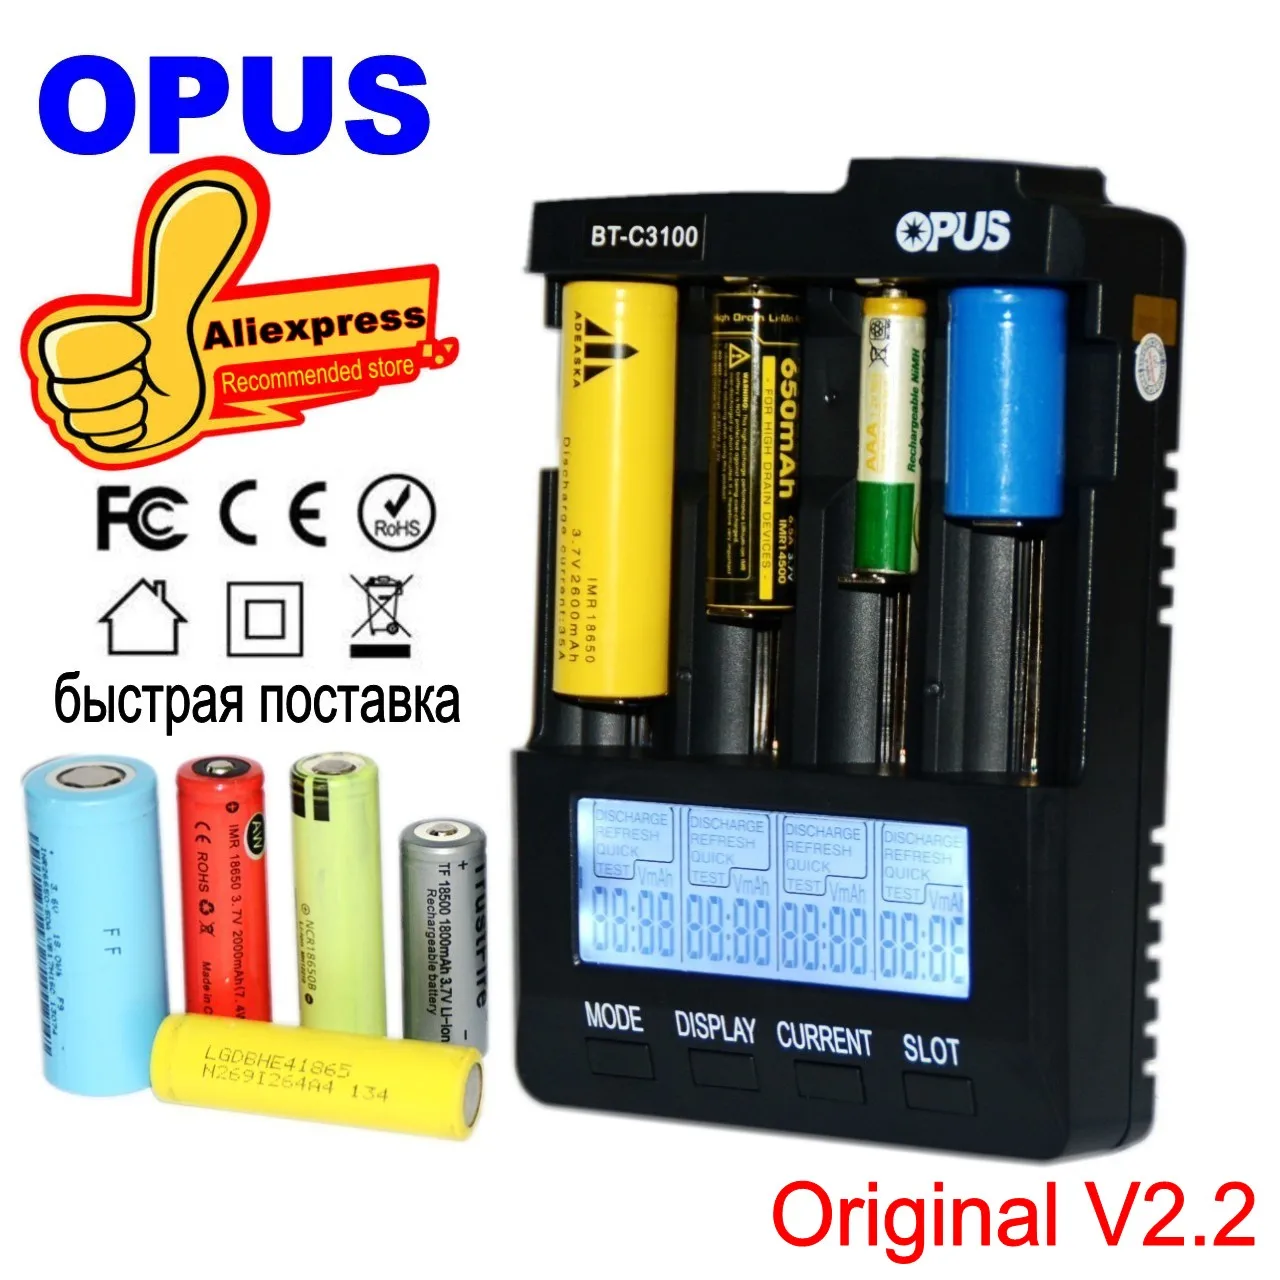 OPUS BT-C3100 Digital Intelligent 4 Slots LCD Battery Charger For Li-ion NiCd NiMH AA AAA 10440 18650 Rechargeable Batteries